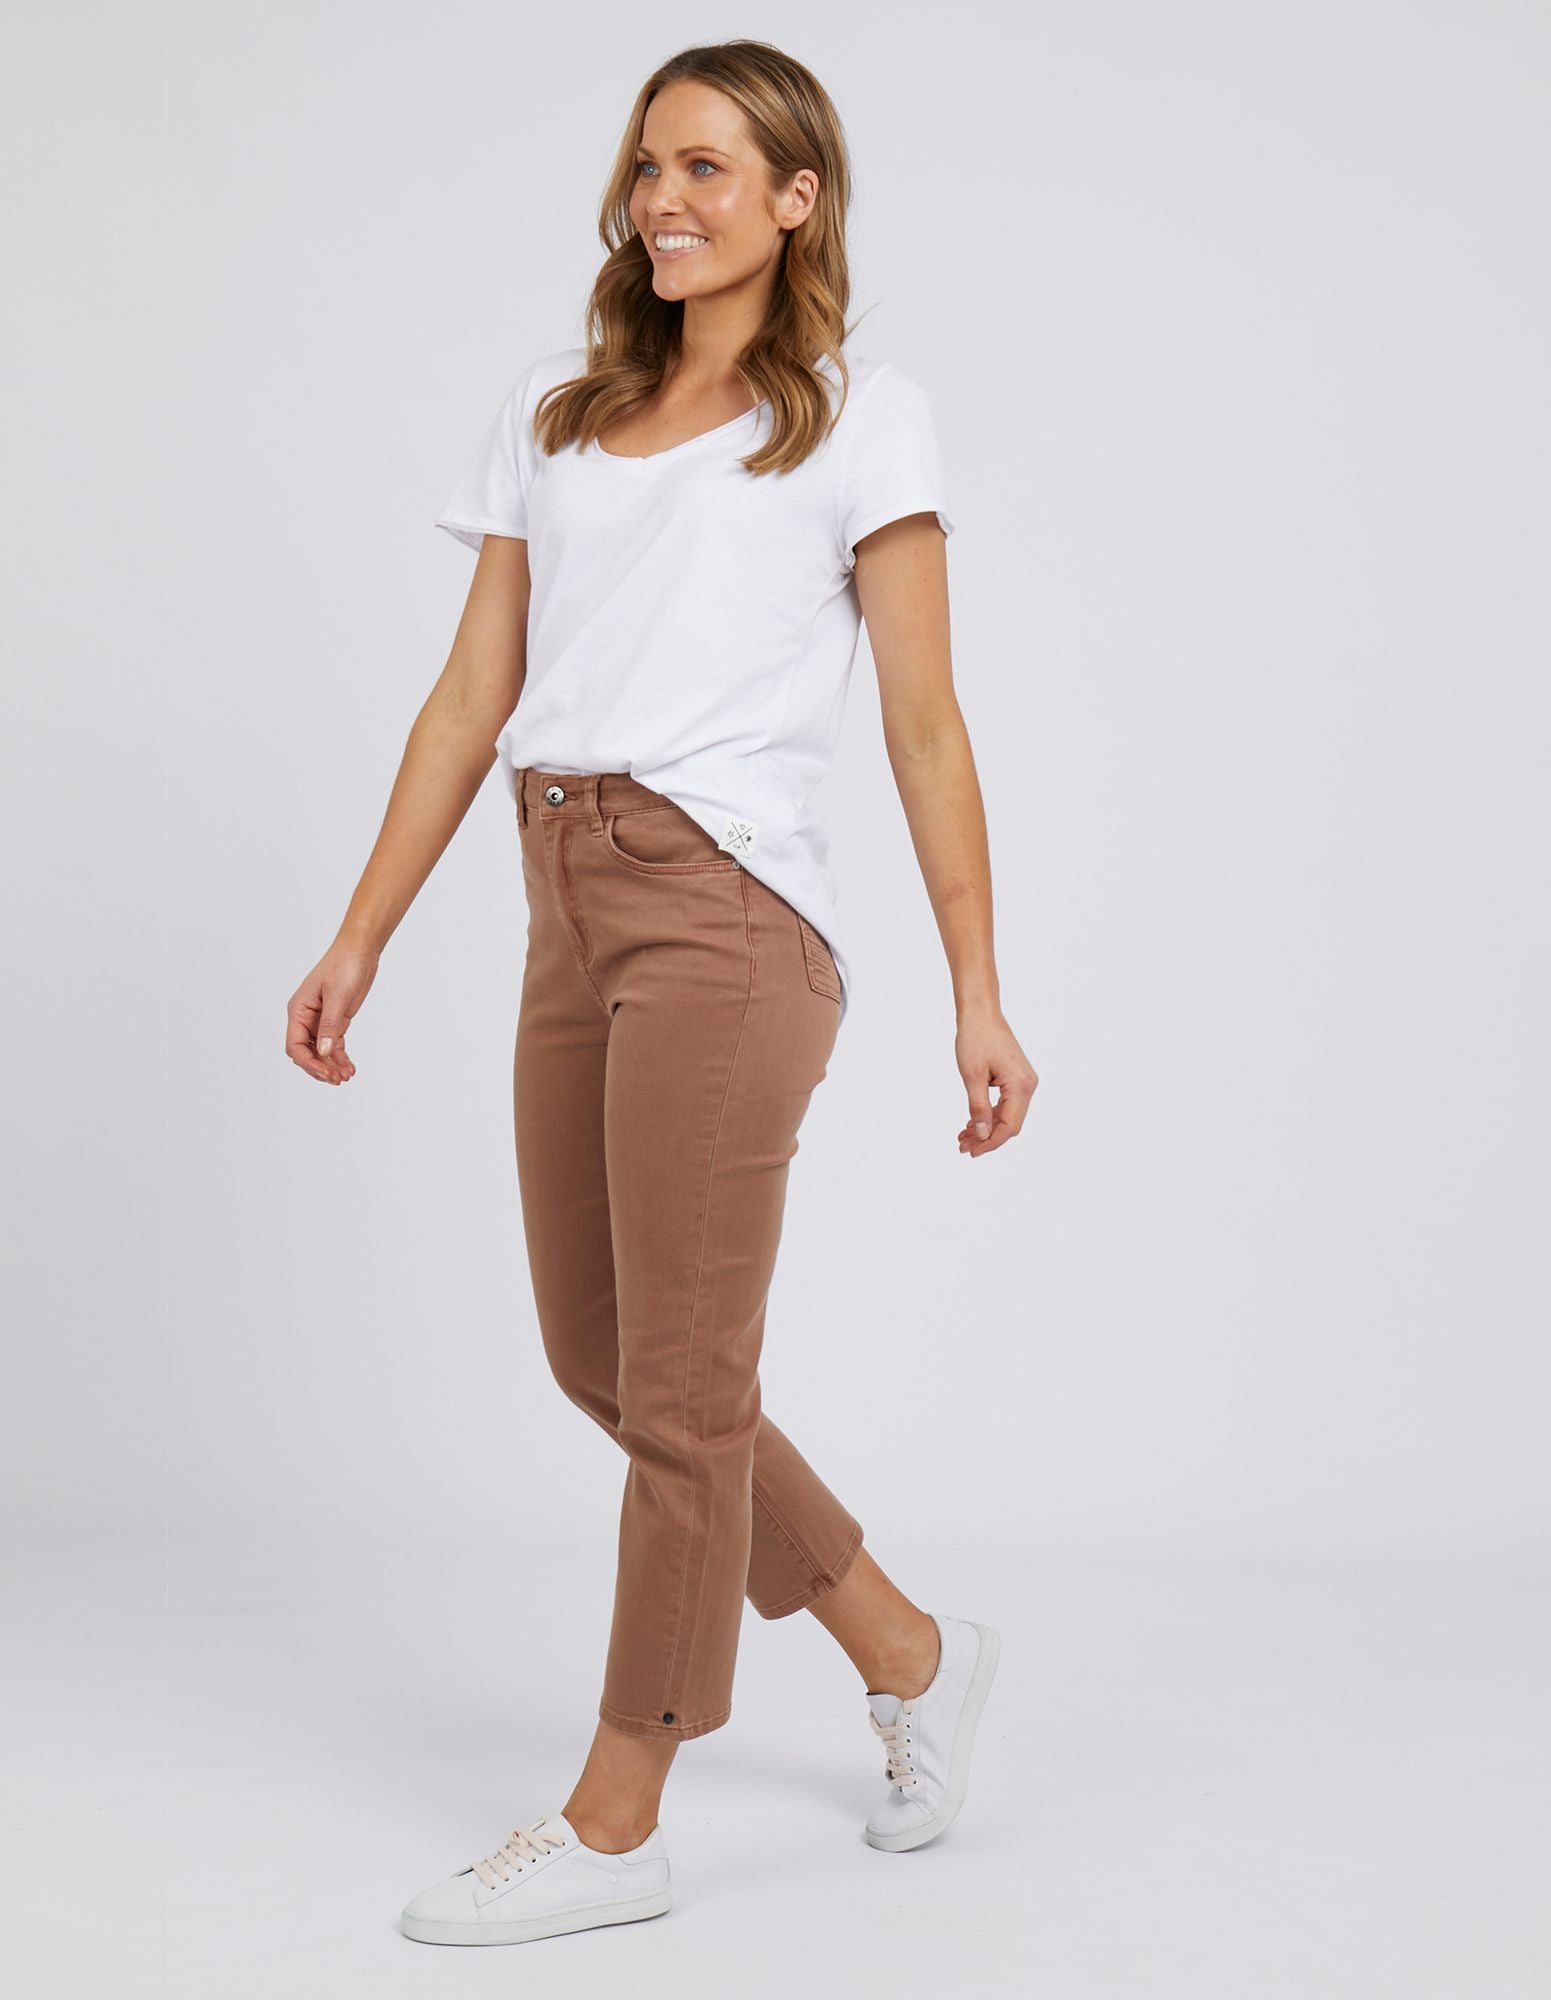 Willow Coloured Jean - Butterscotch - Elm Lifestyle - FUDGE Gifts Home Lifestyle